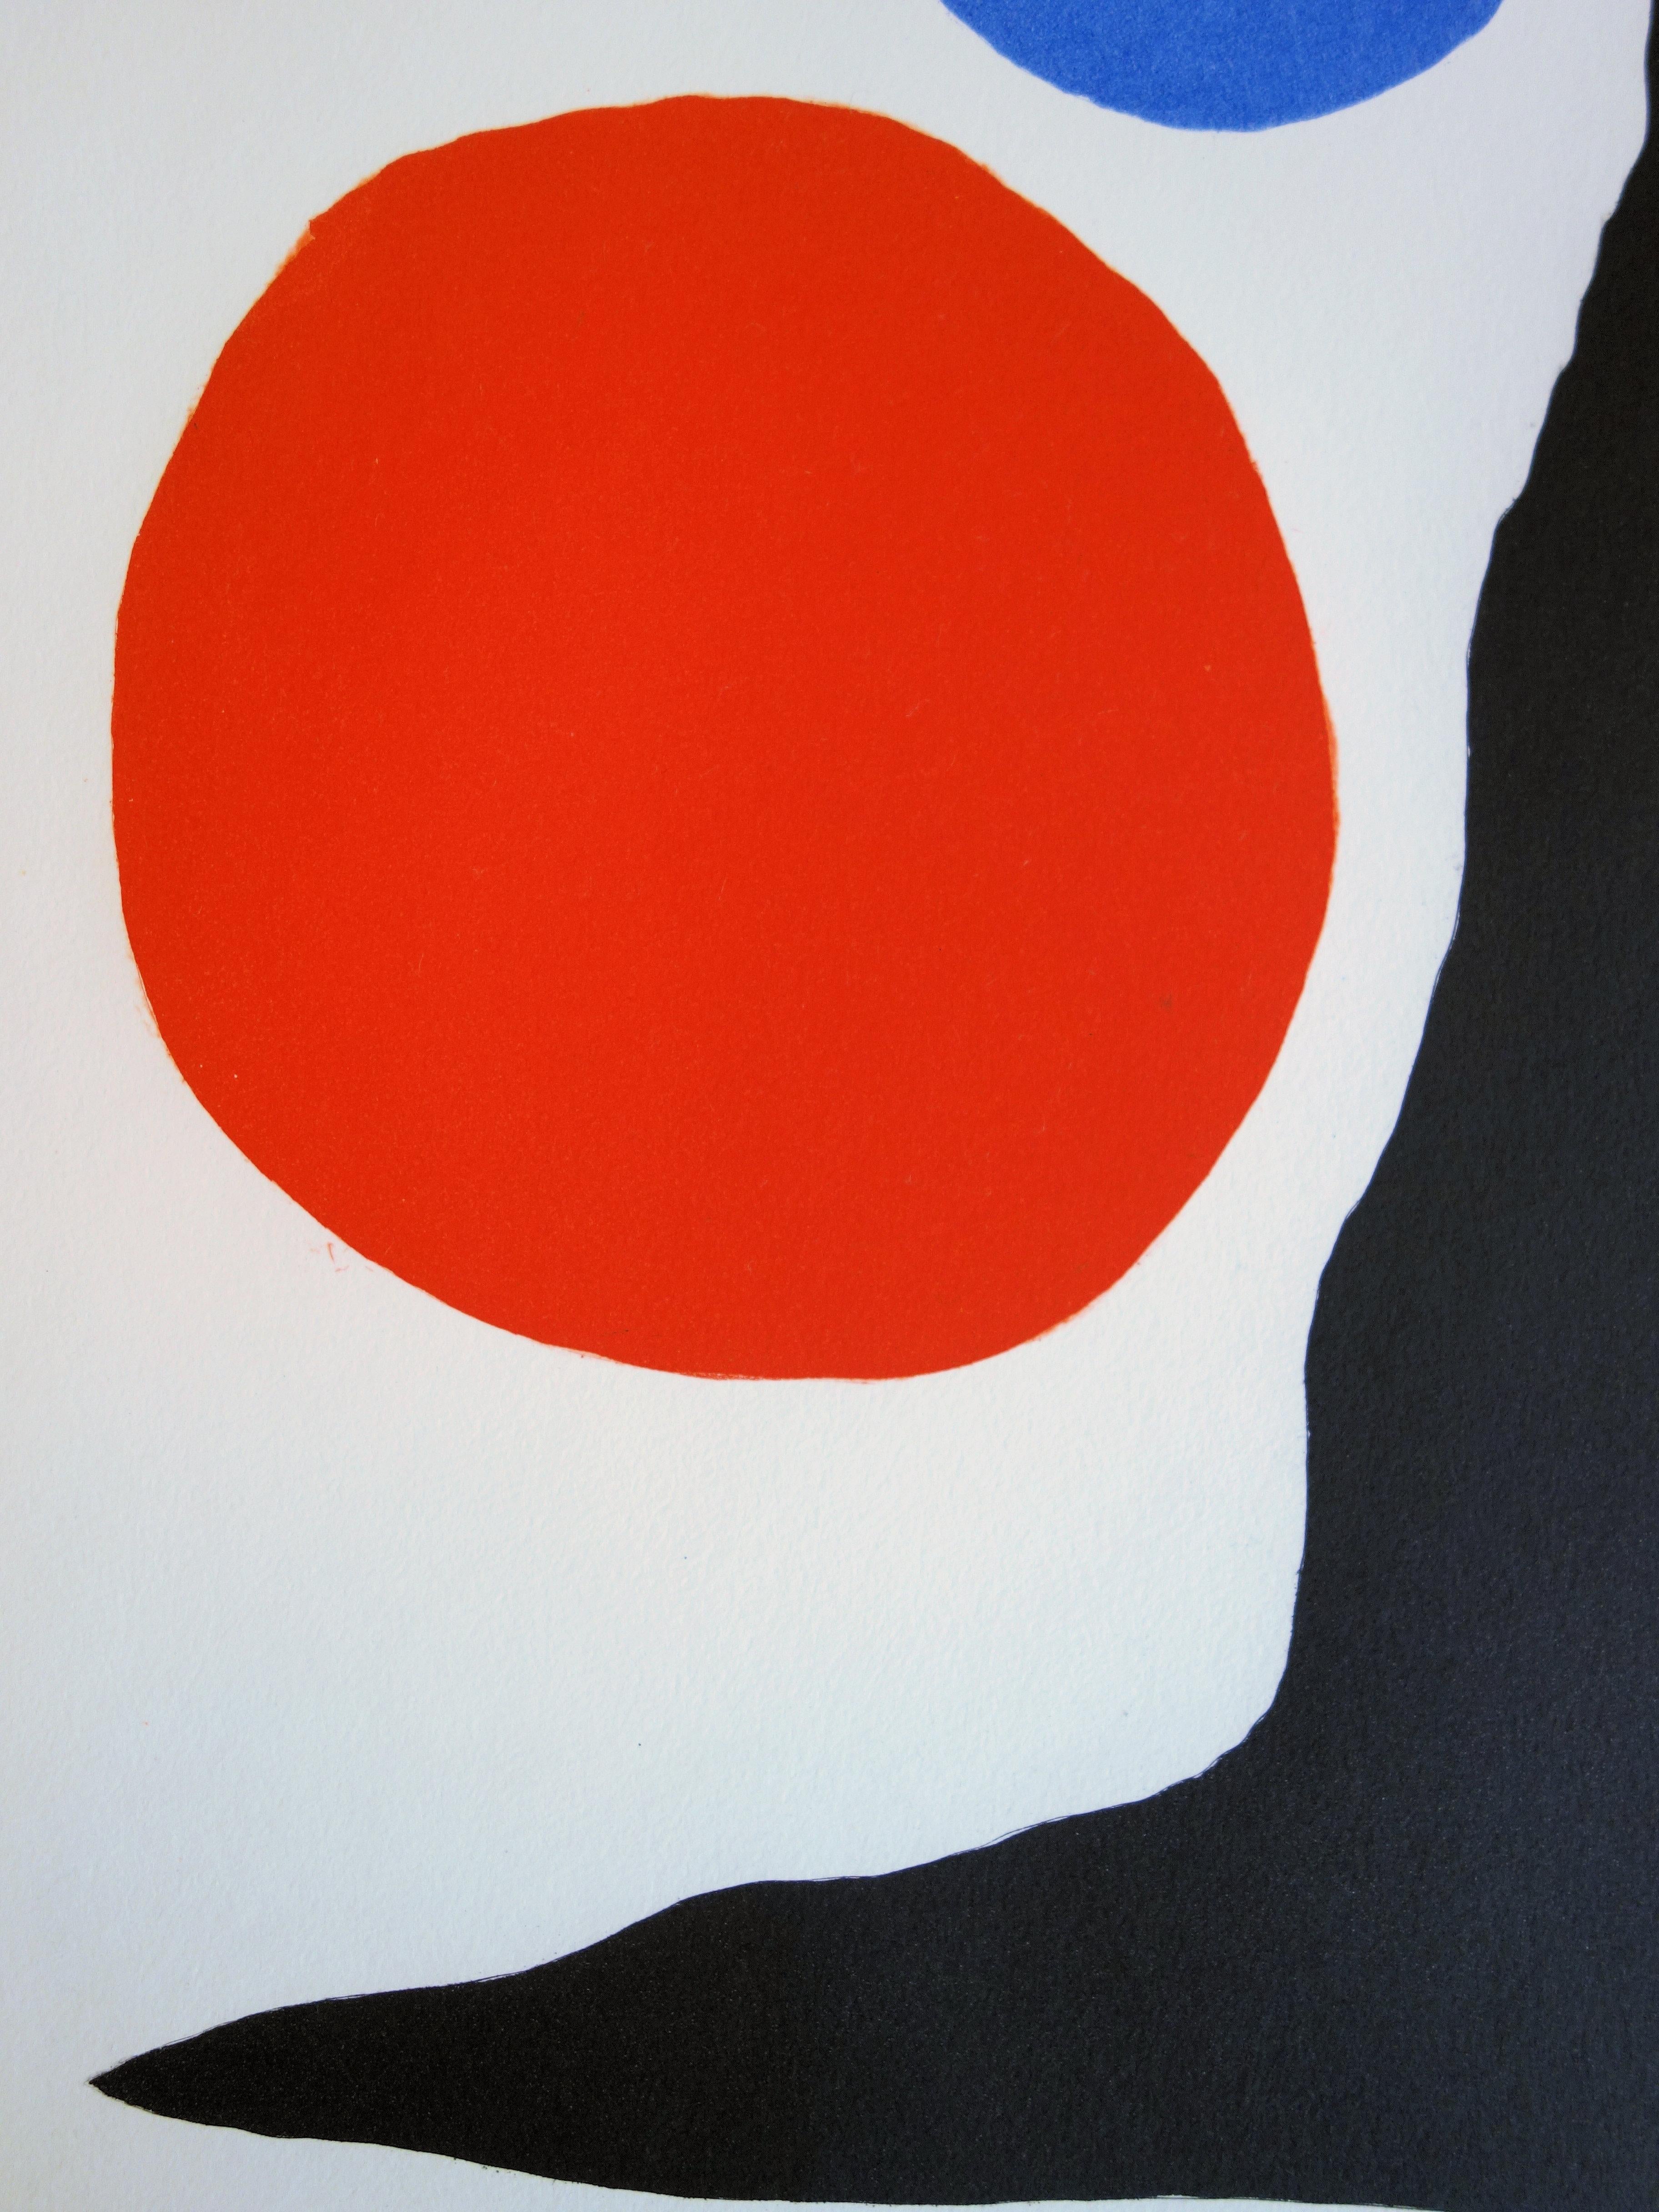 Blue and Red Ball - Original color Etching and Aquatint - 1967 - Gray Abstract Print by Alexander Calder